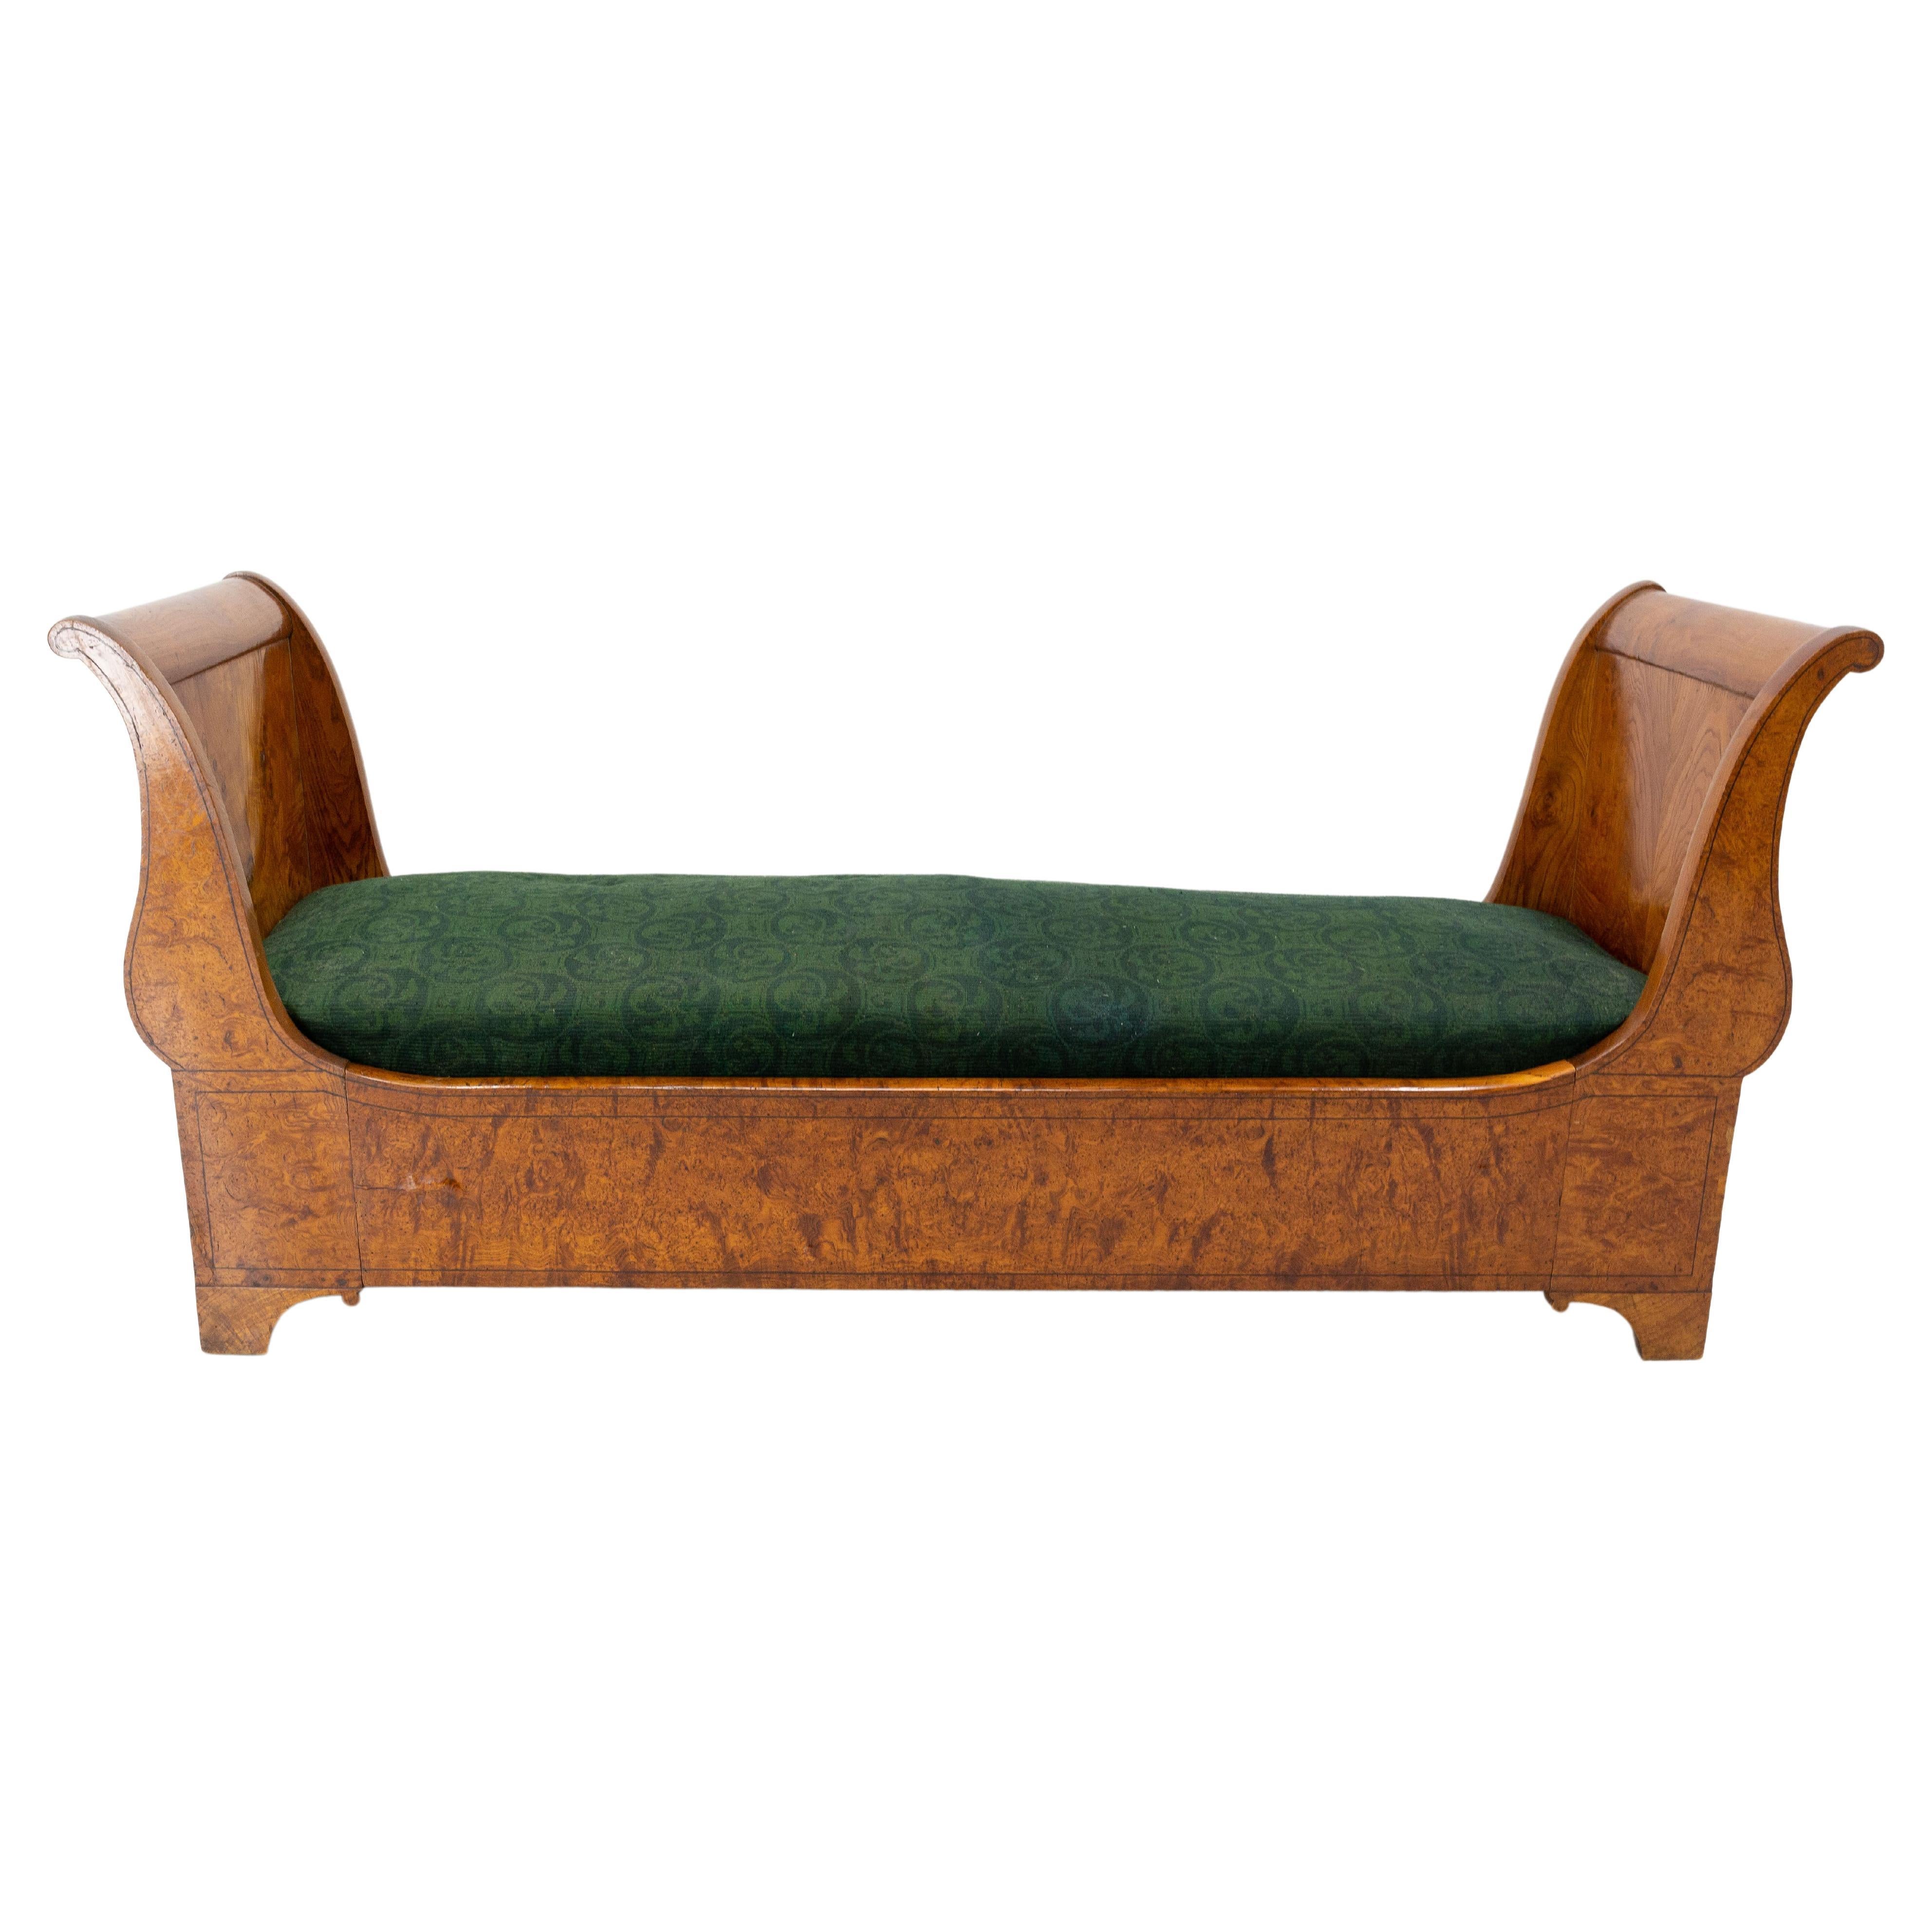 French Empire Elm Burl Sofa Banquette, French, Early 19th Century